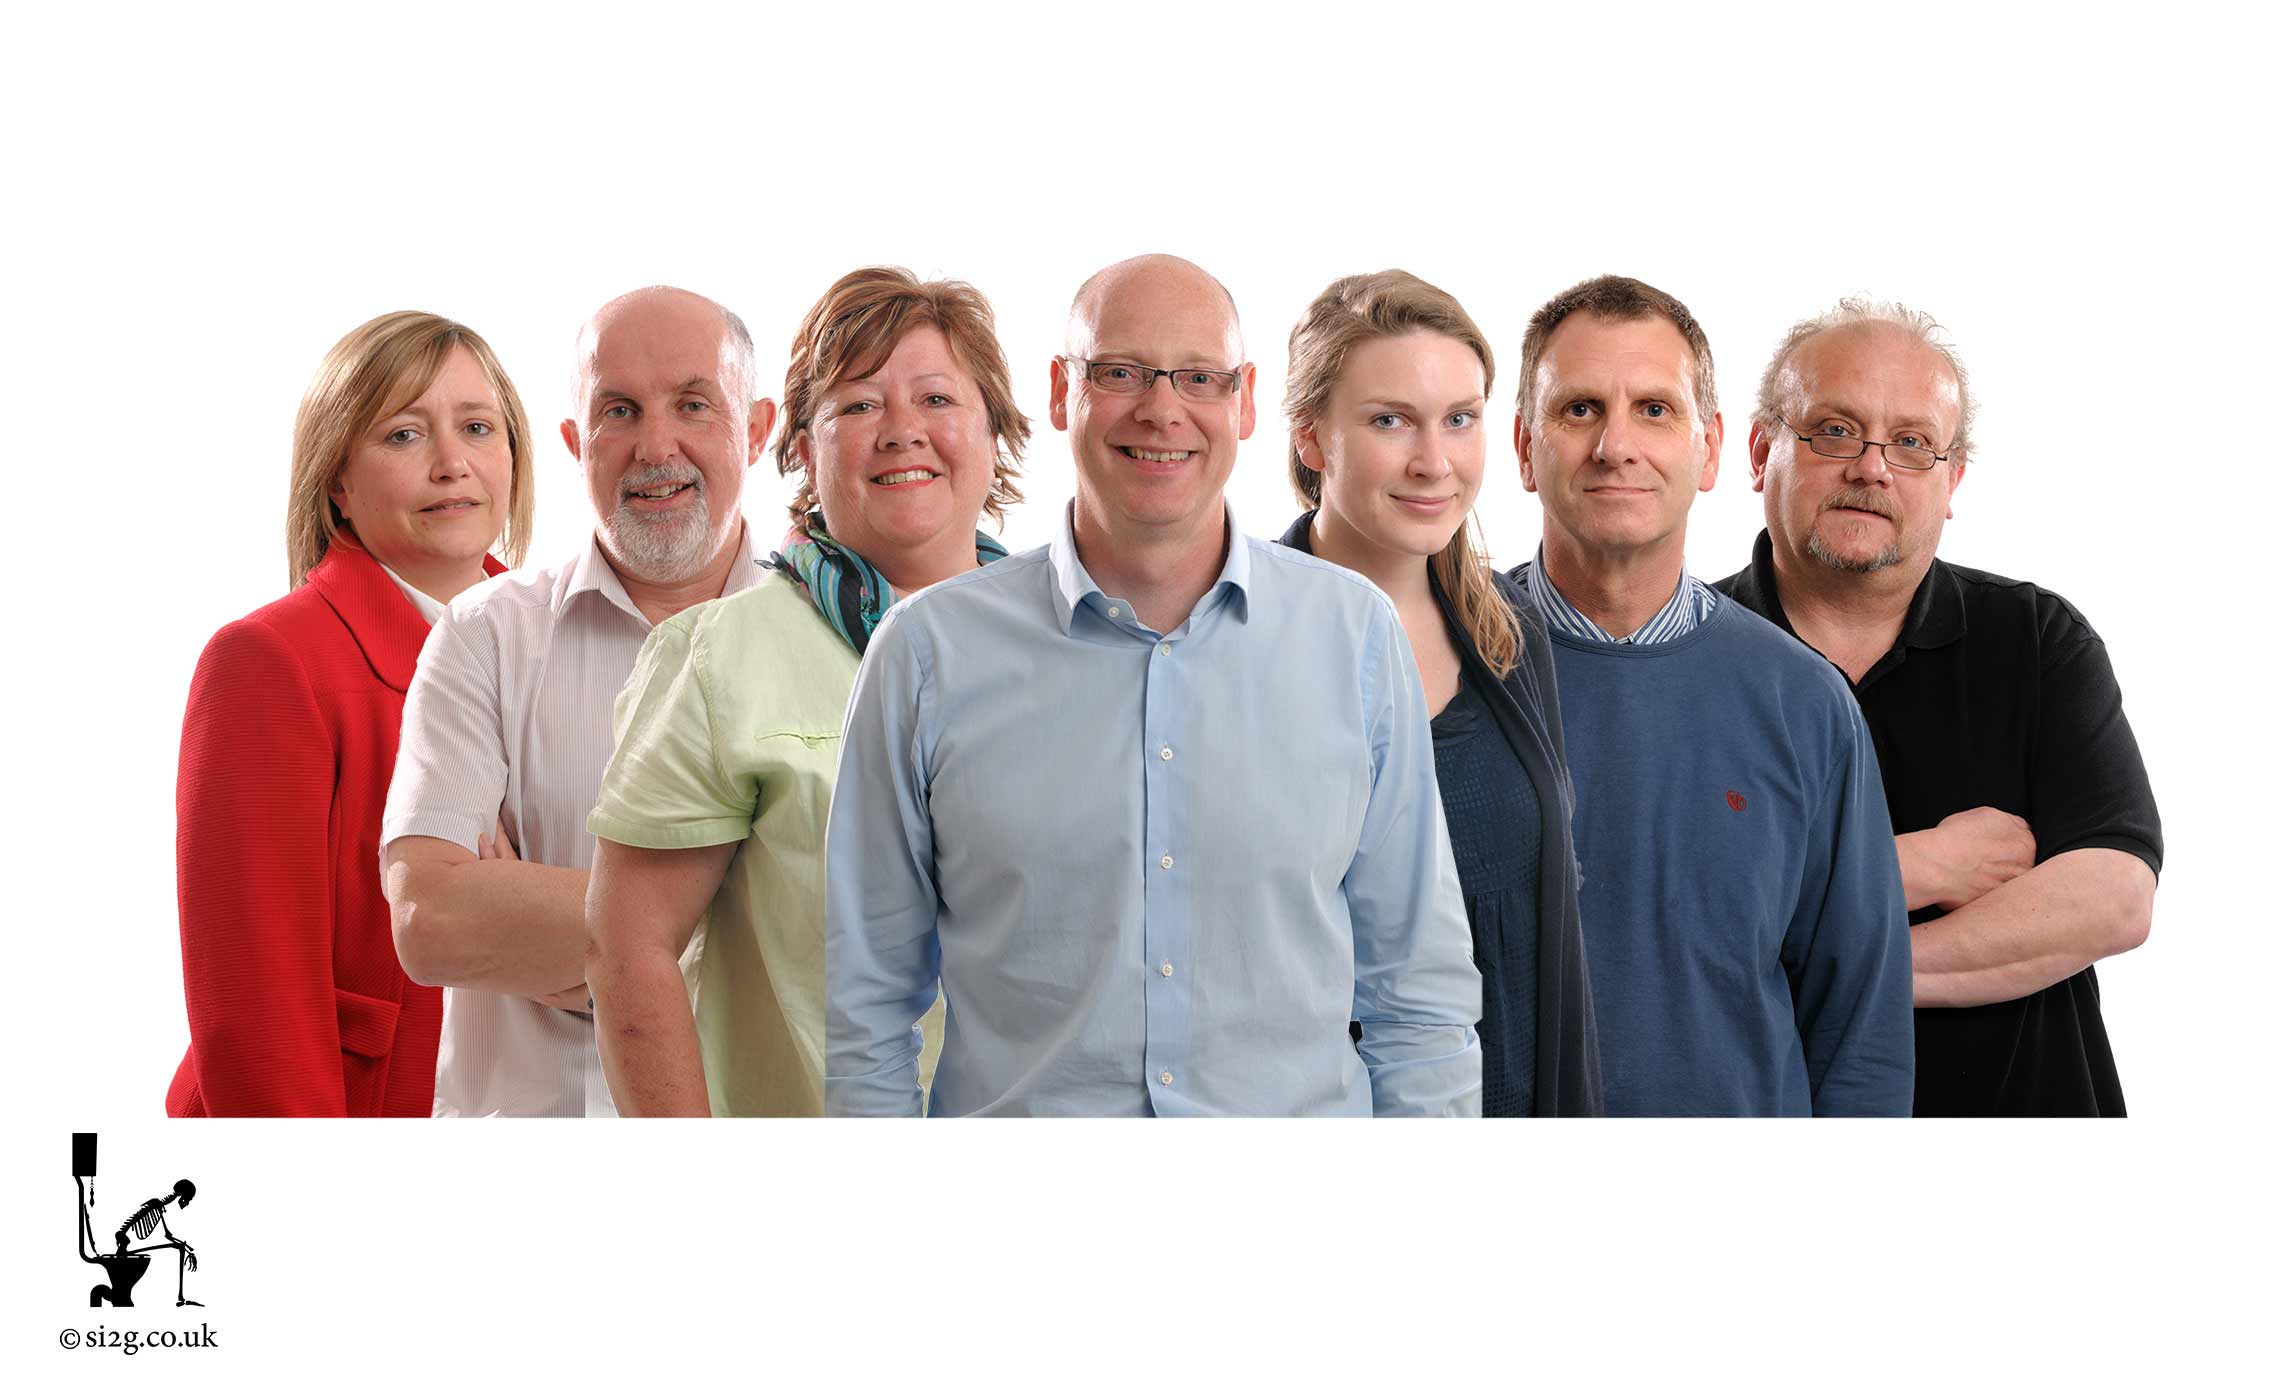 Team Composite - This group photo composite is a great way to promote your team and causes a lot less disruption to your company